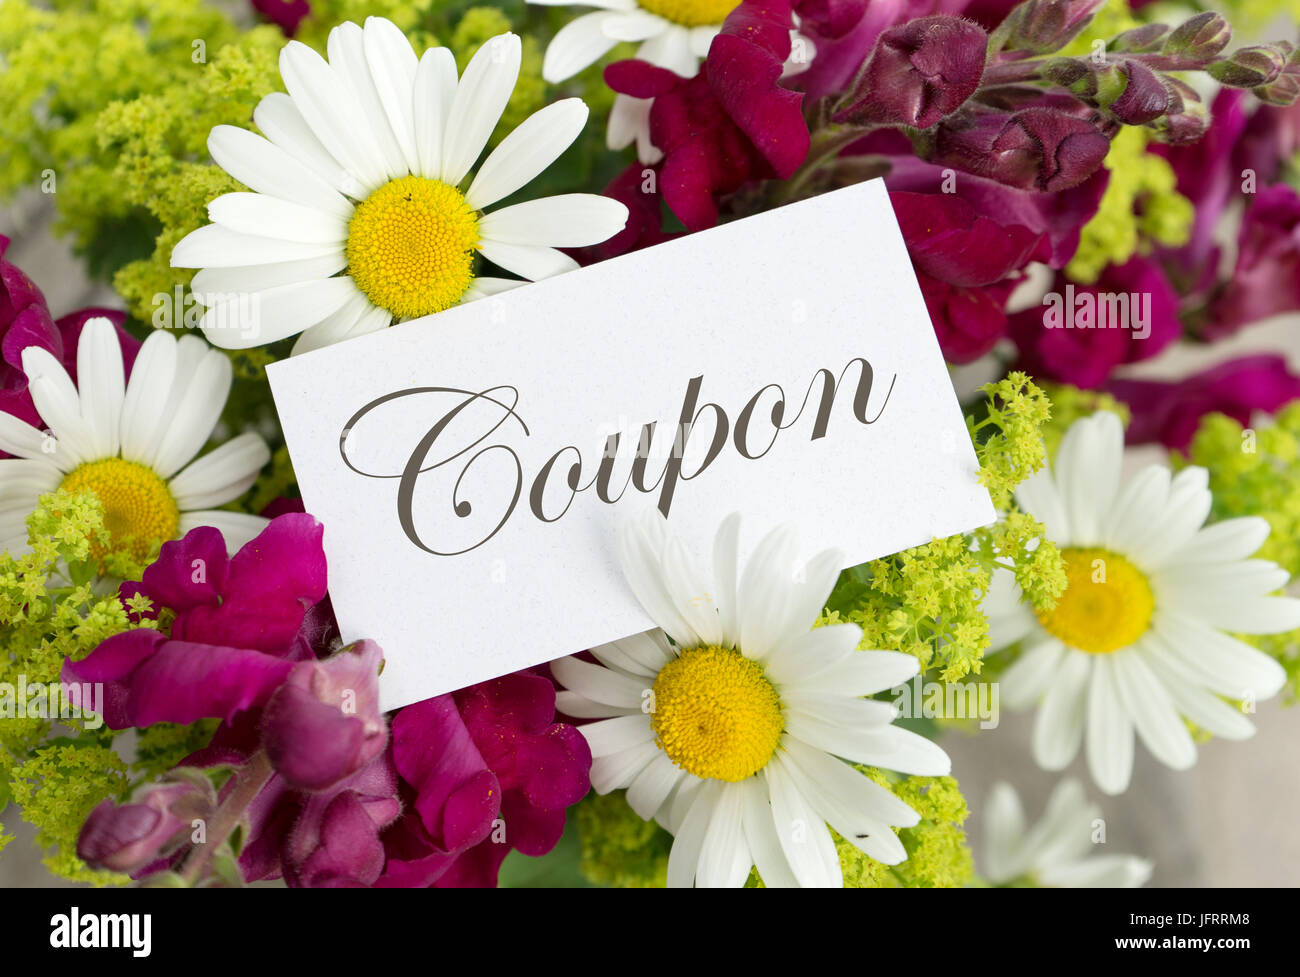 Voucher with snapdragons and daisies Stock Photo